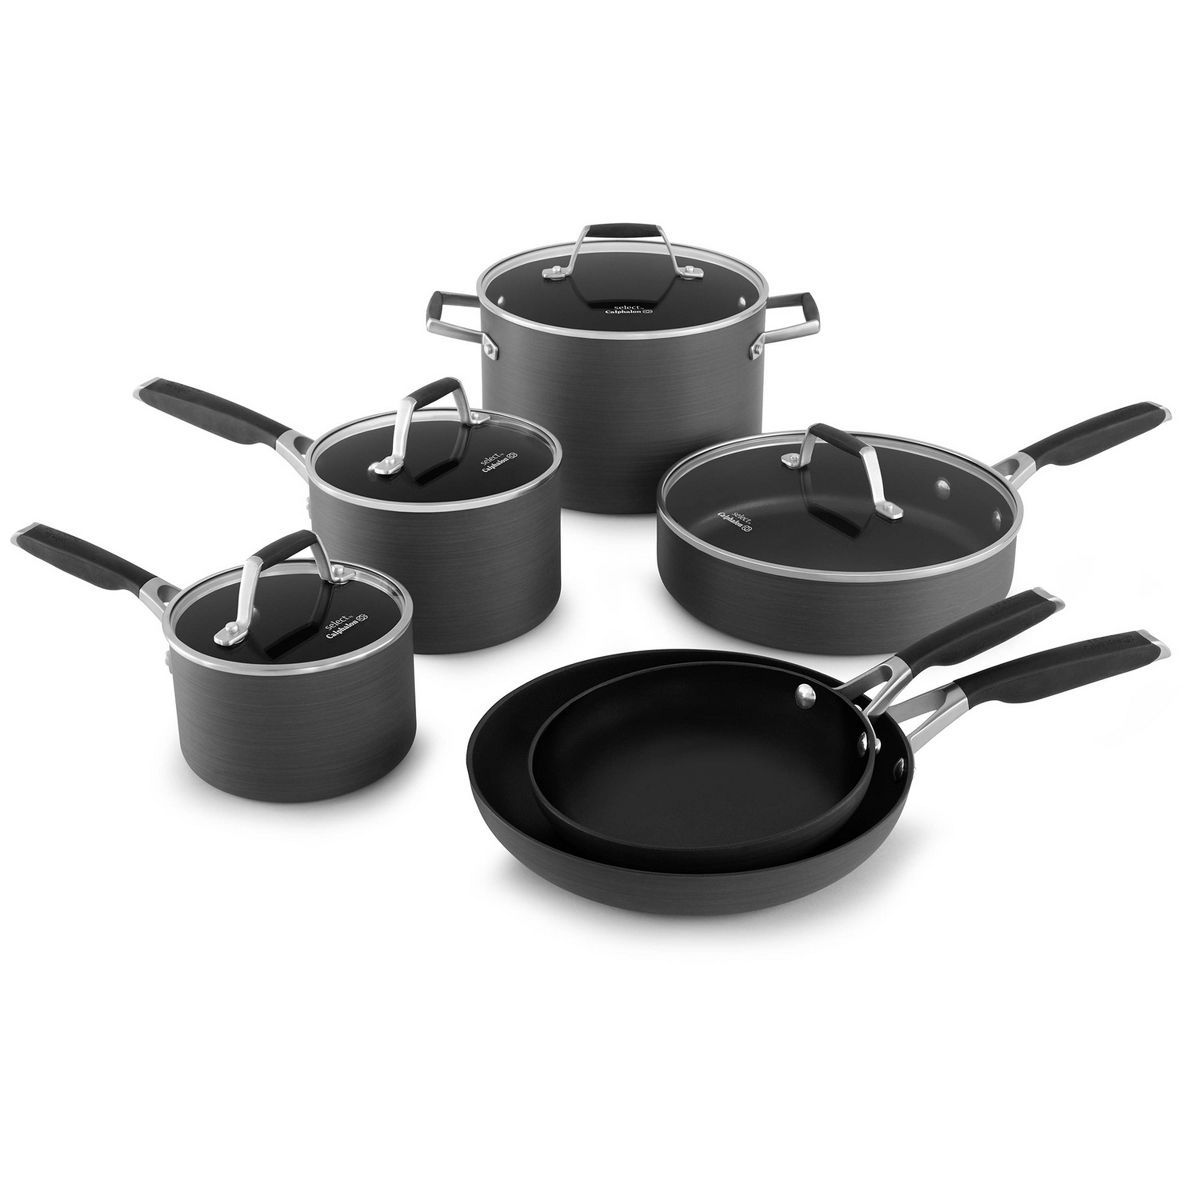 Select by Calphalon with AquaShield Nonstick 10pc Cookware Set | Target